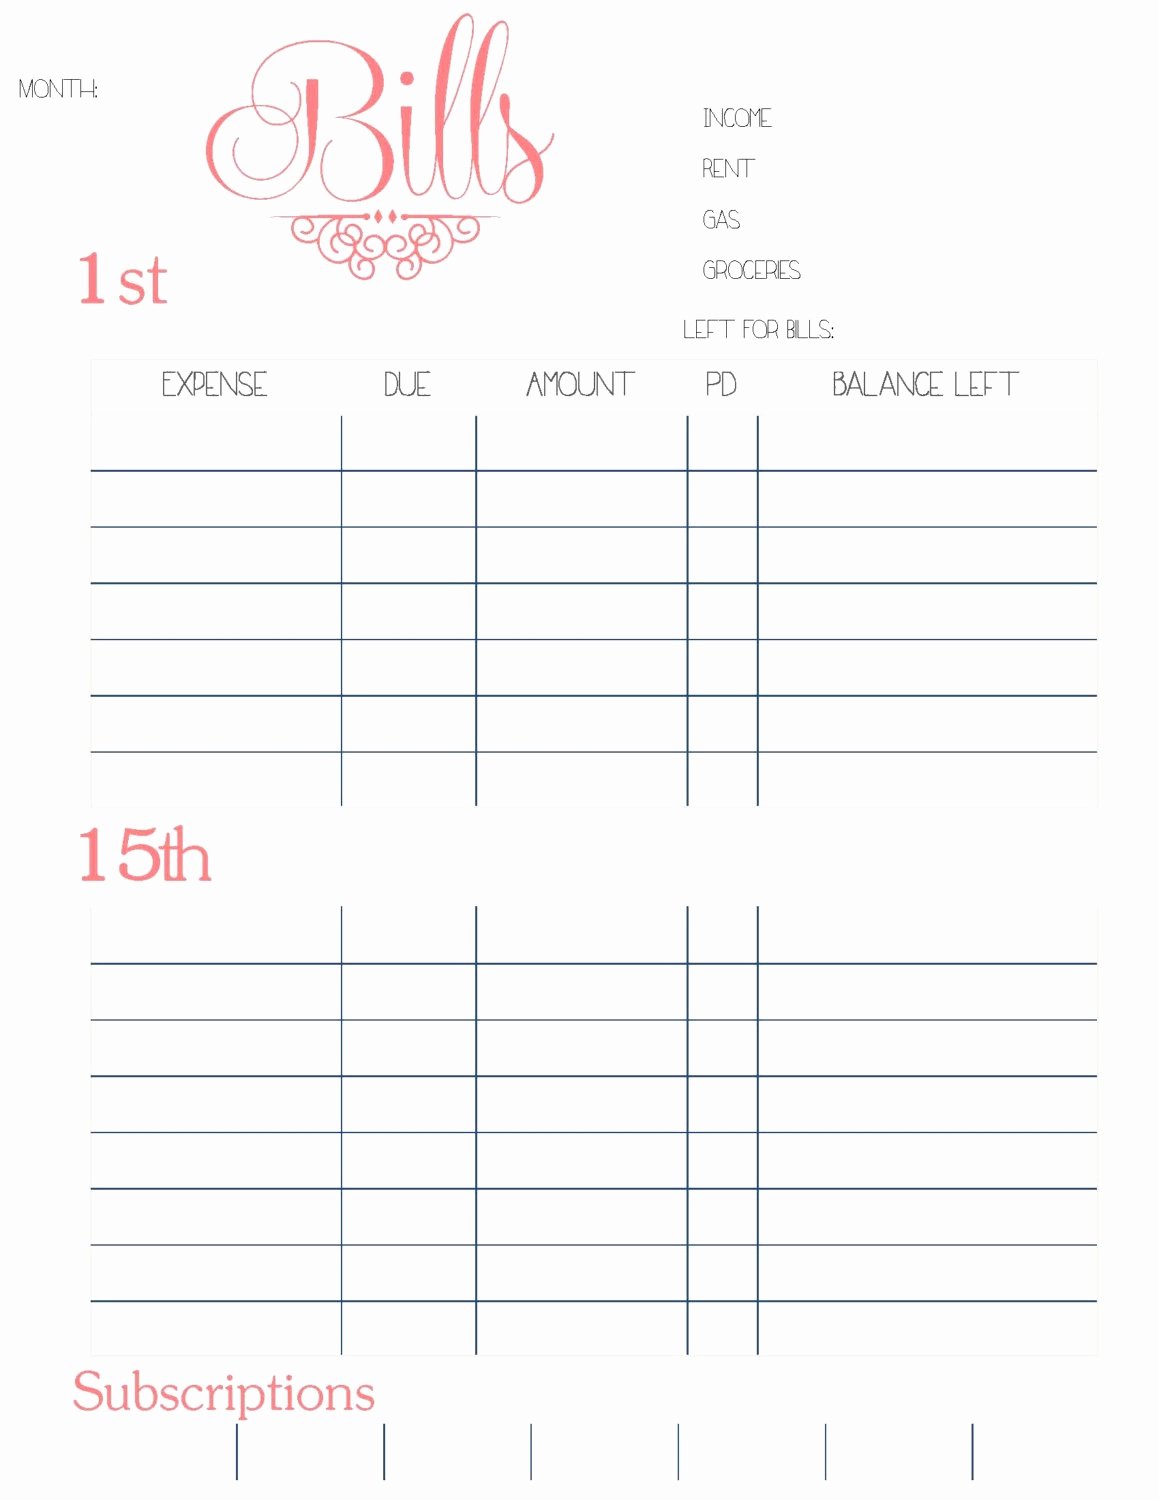 Monthly Bill Calendar Template Unique Monthly Bill Calendar Template Printable – Calendar